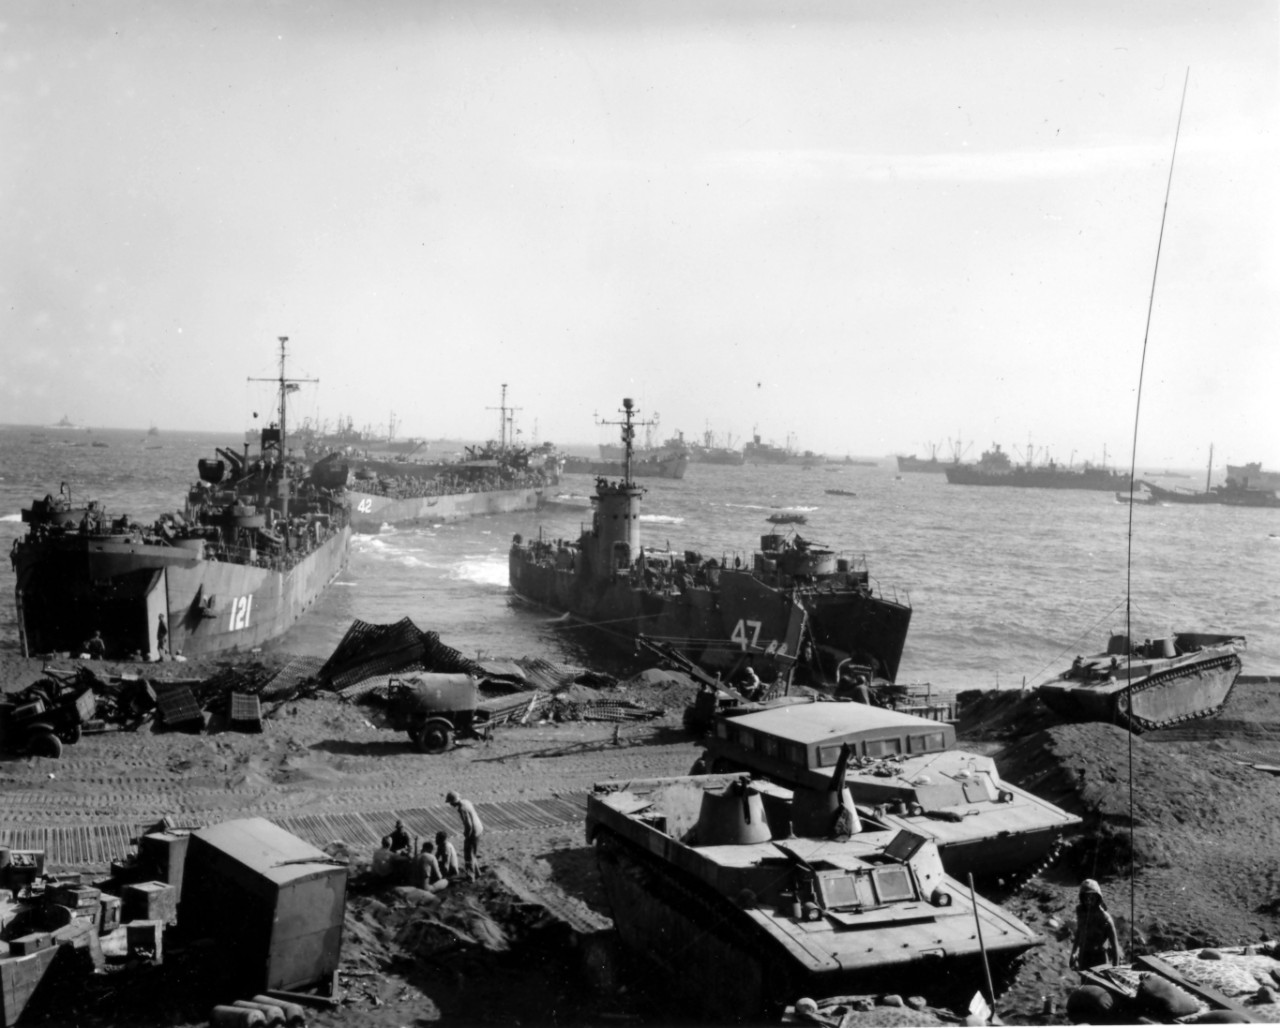 <p>Personnel, supplies, and various LVTs remain on the beach at Iwo Jima on 25 February 1945. <a href="https://www.history.navy.mil/content/history/nhhc/research/histories/ship-histories/danfs/l/lst-121.html"><i>LST-121</i></a> and <i>LSM-47</i> are beached at the shoreline, while <a href="https://www.history.navy.mil/content/history/nhhc/research/histories/ship-histories/danfs/l/lst-42.html"><i>LST-42</i></a> maneuvers behind them. Image is from the Admiral Harry W. Hill Collection.</p>
